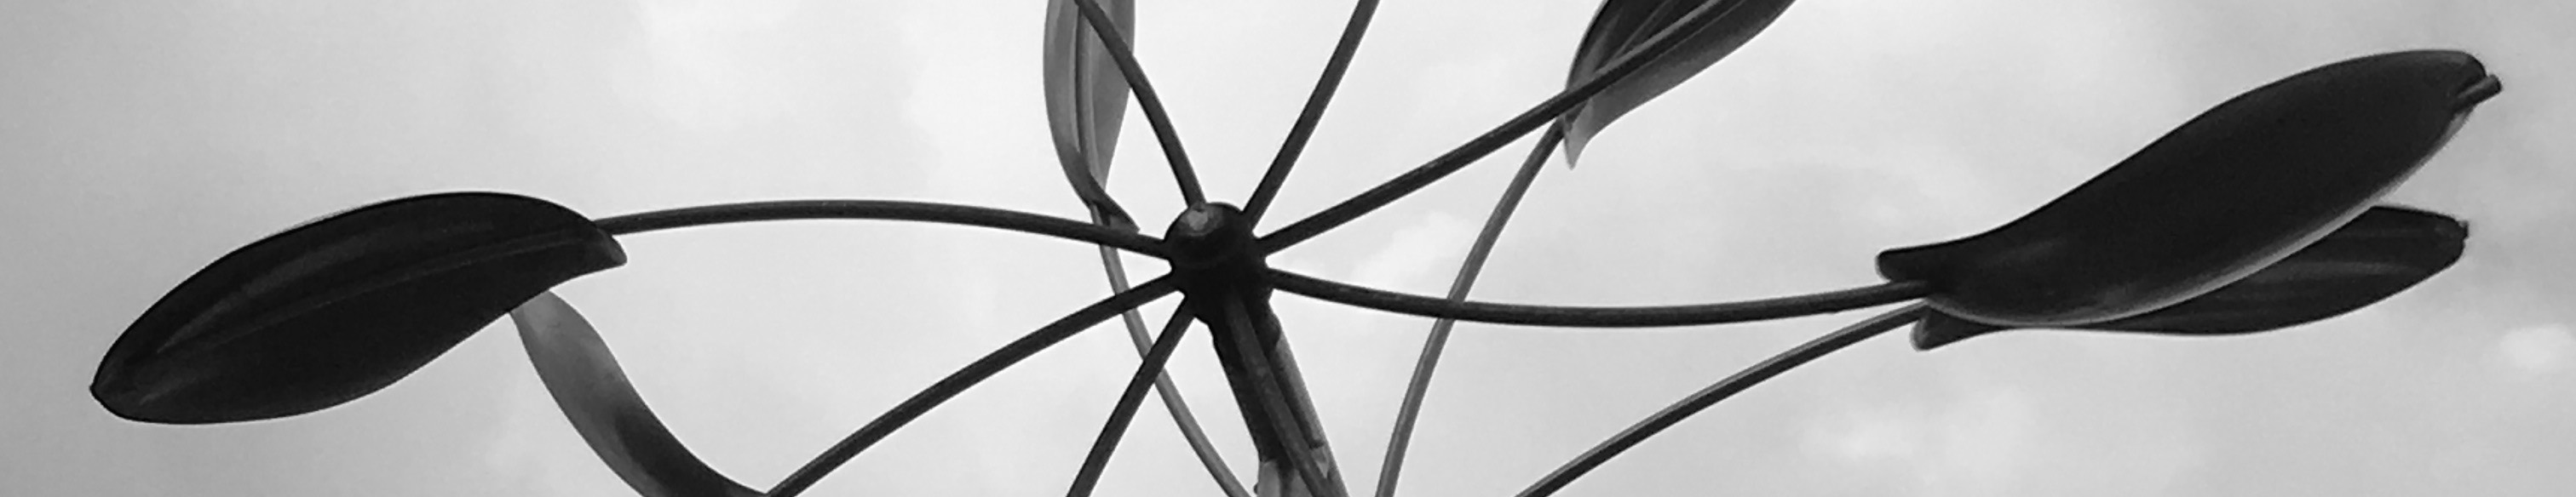 Whirligigs Wind Sculpture, Wilkeson Point Park, Buffalo, NY